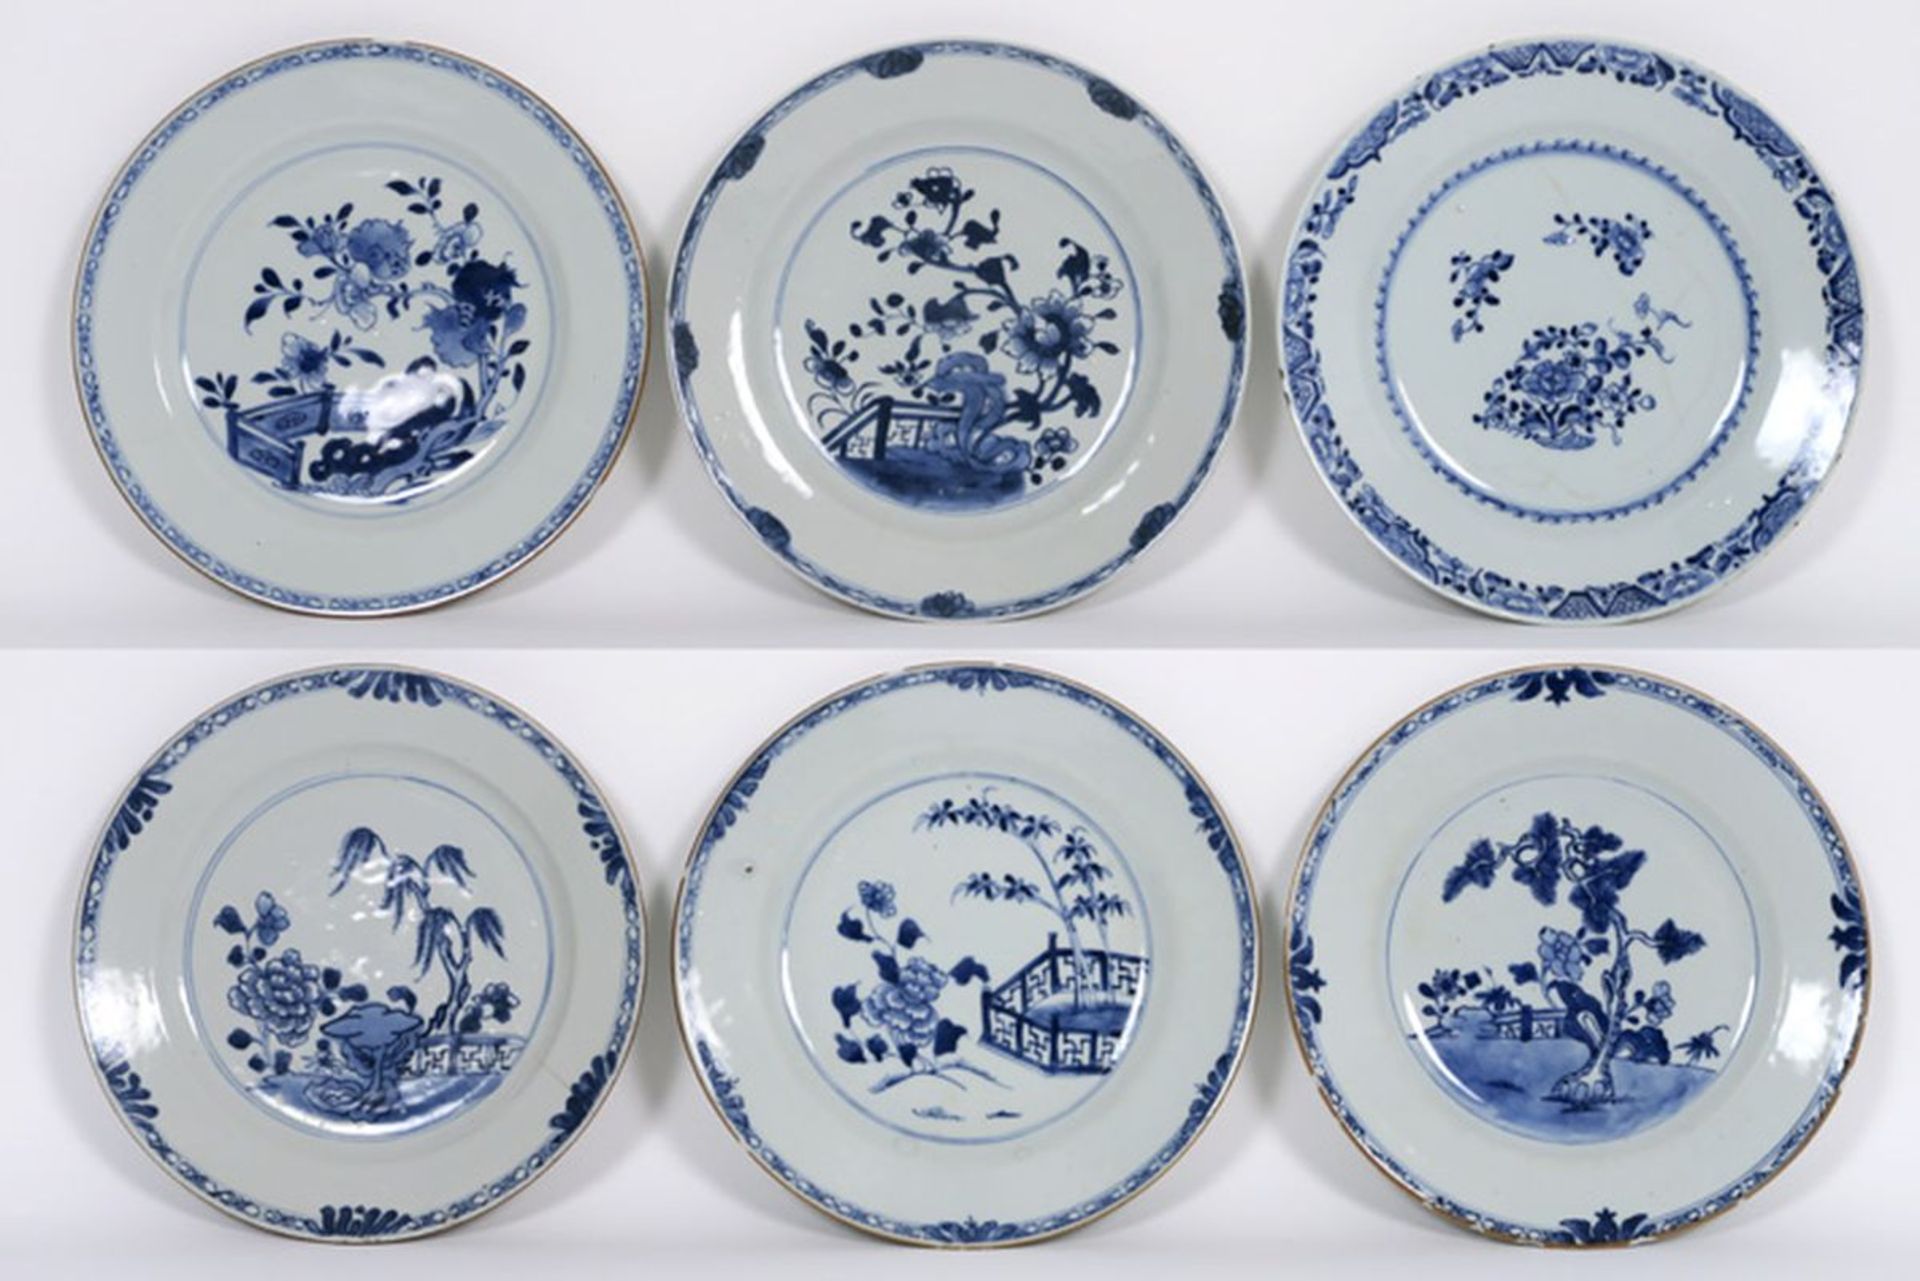 six 18th Cent. Chinese plates in porcelain with blue-white decor - - Lot van zes [...]